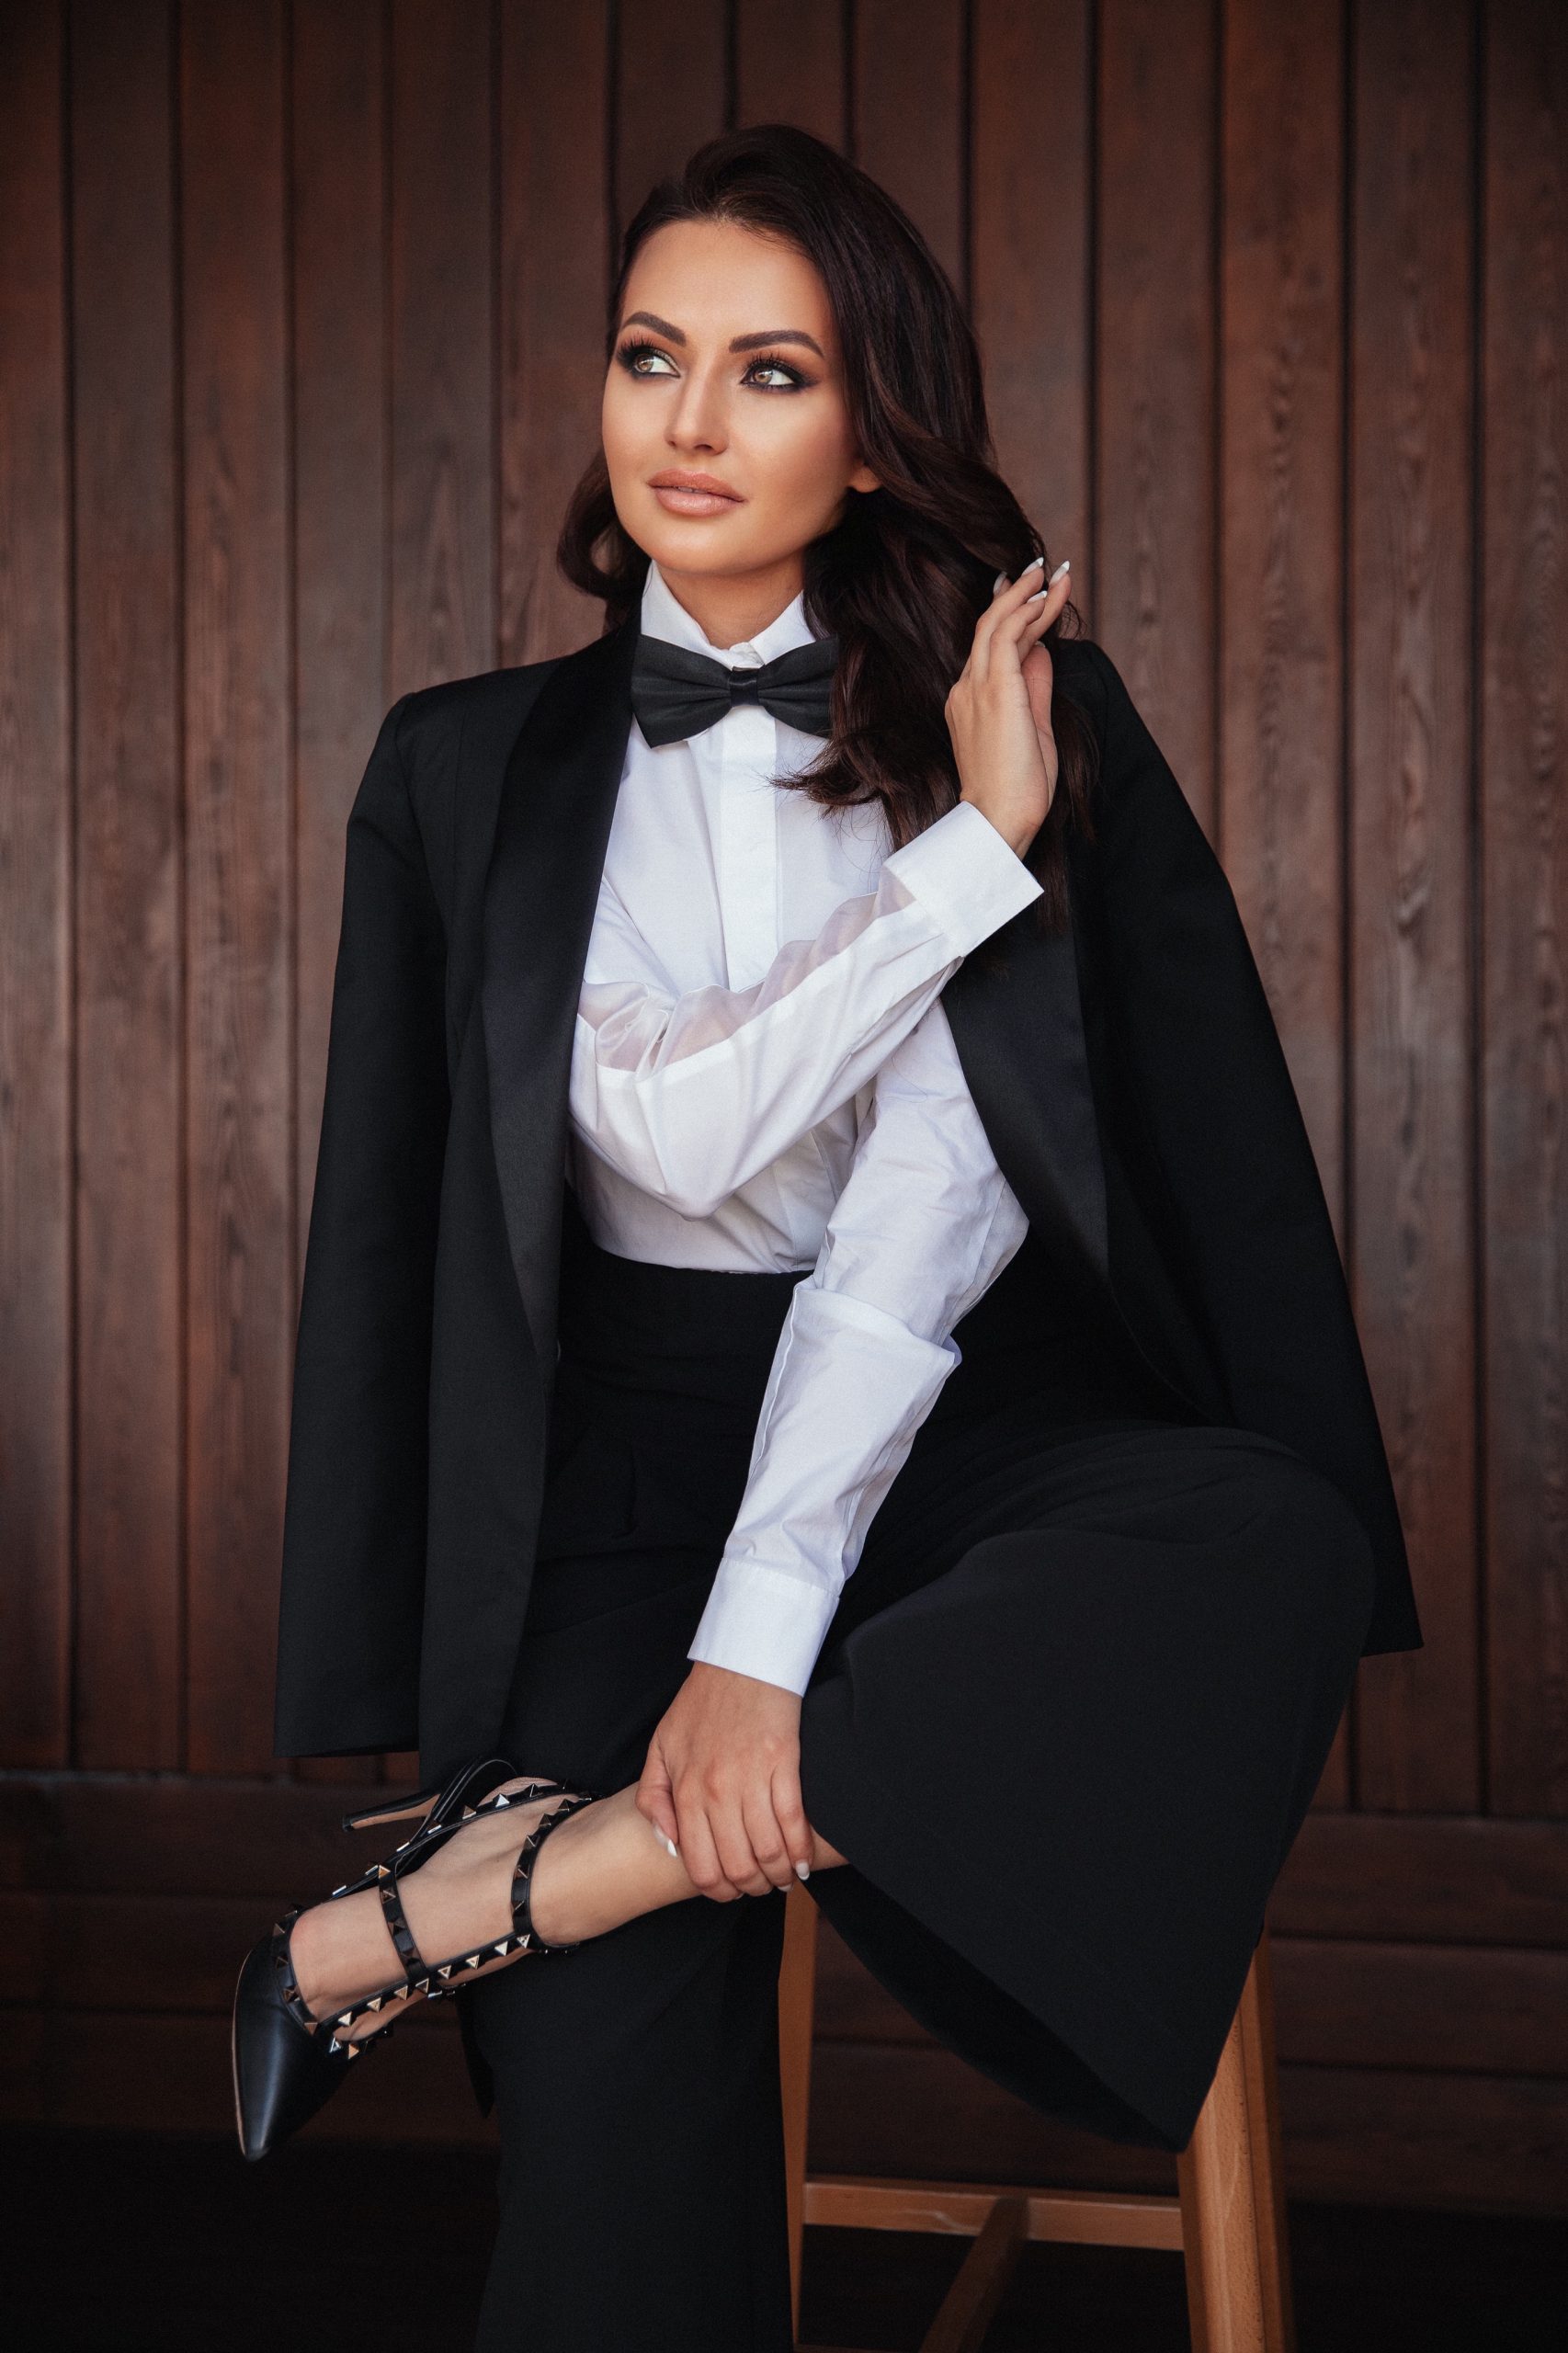 Interview with Alina Dyachenko Influencer, Founder & CEO of CHIC ICON ...